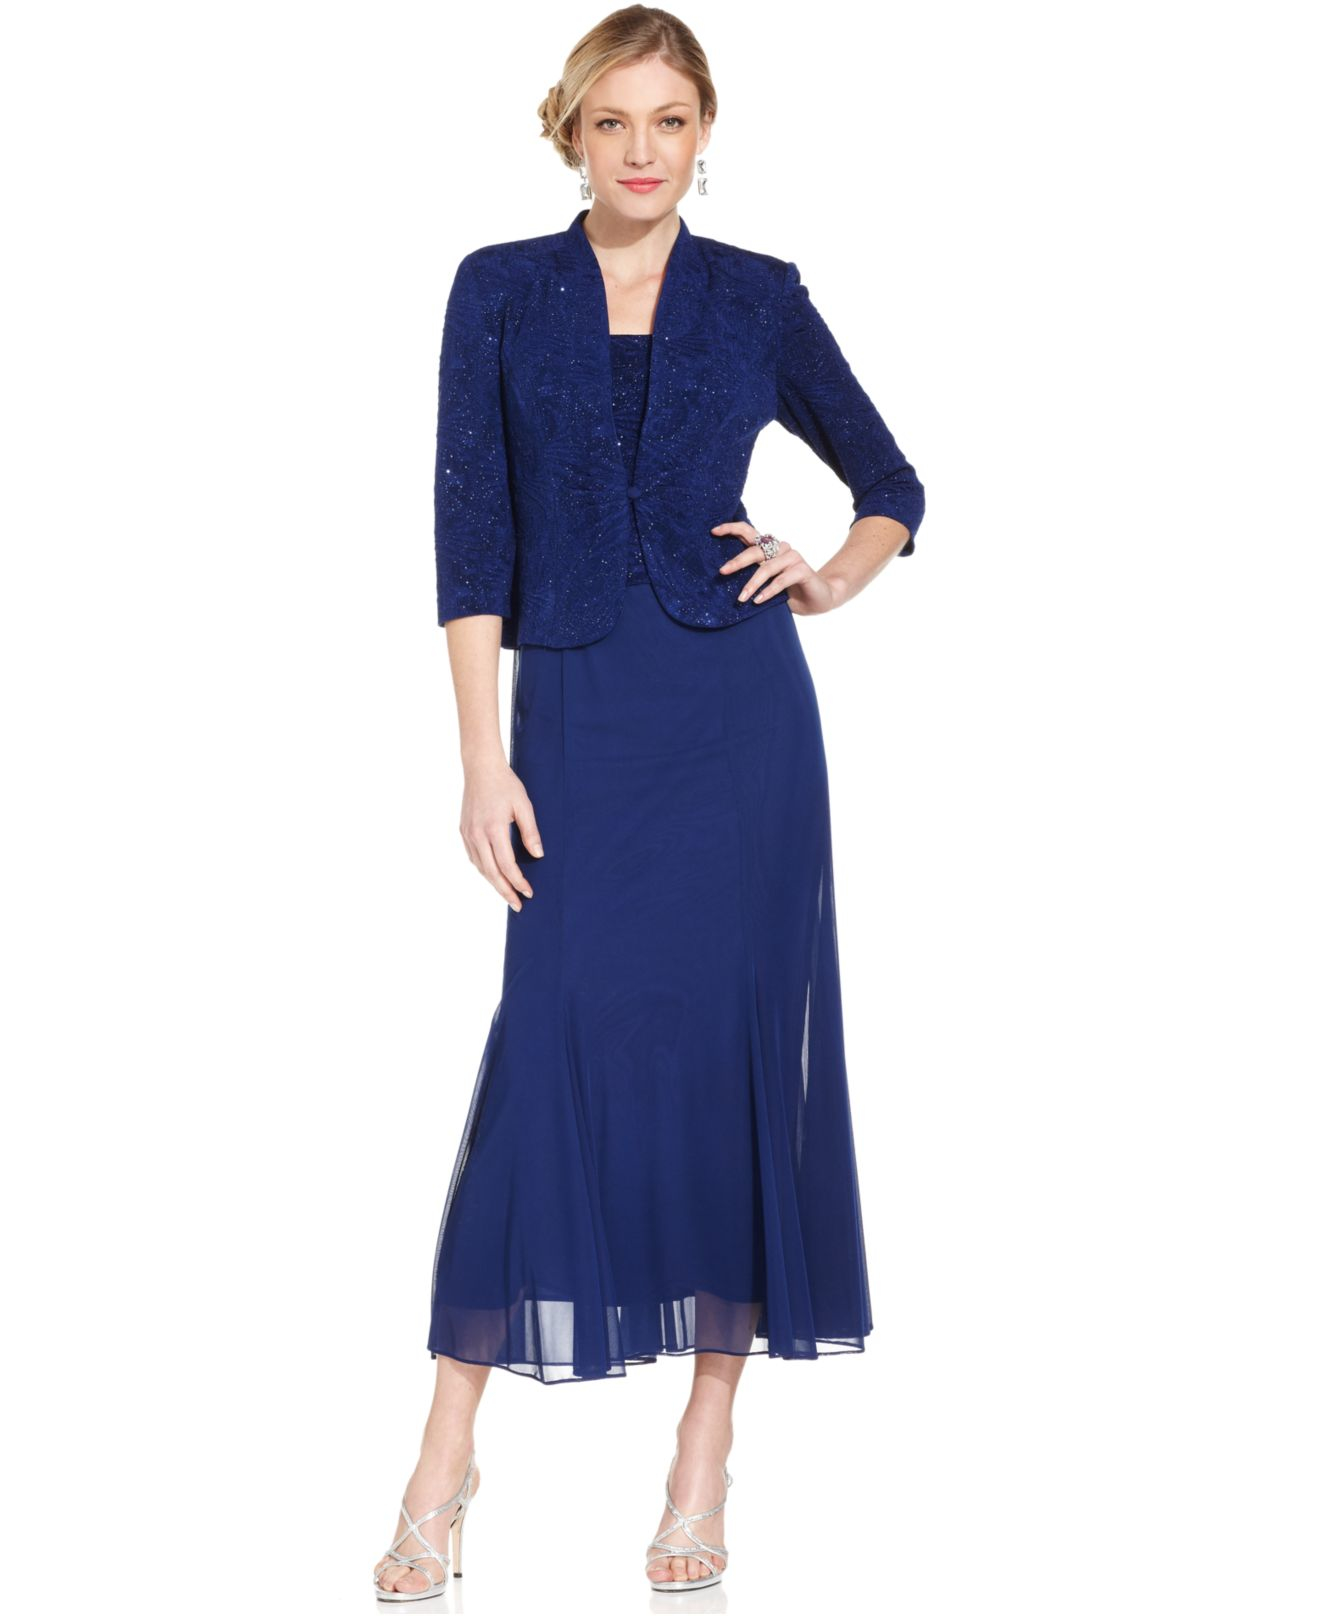 Alex evenings Petite Dress And Jacket, Sleeveless Glitter Gown in Blue ...